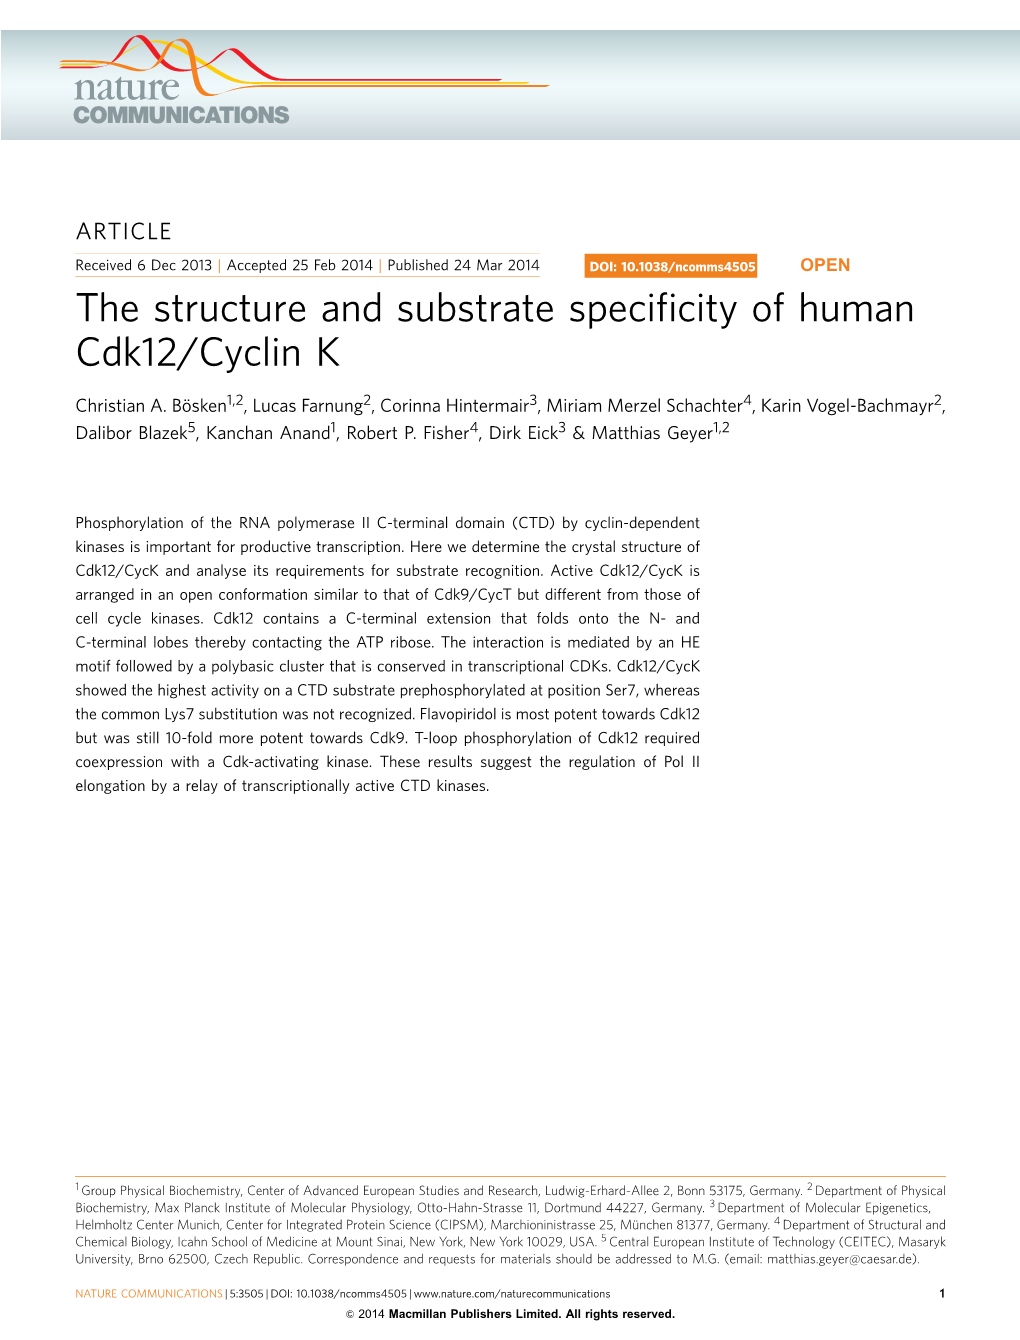 The Structure and Substrate Specificity of Human Cdk12/Cyclin K